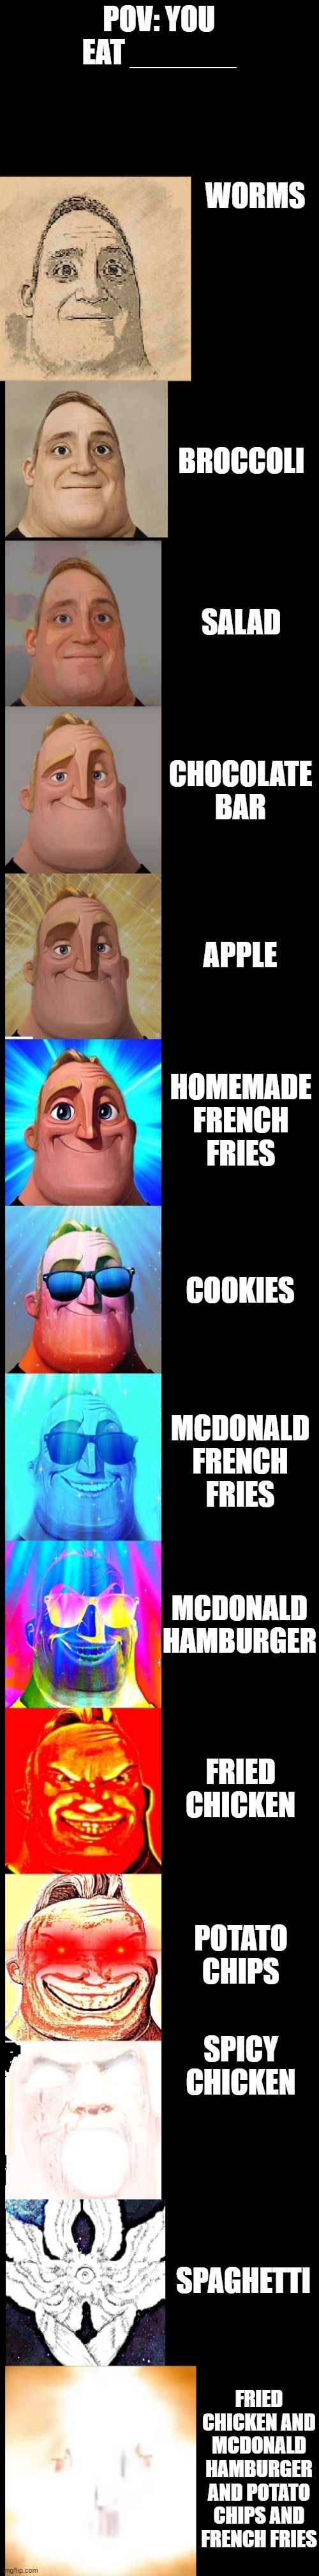 mr incredible becoming canny (you eat:_______) | POV: YOU EAT ______; WORMS; BROCCOLI; SALAD; CHOCOLATE BAR; APPLE; HOMEMADE FRENCH FRIES; COOKIES; MCDONALD FRENCH FRIES; MCDONALD HAMBURGER; FRIED CHICKEN; POTATO CHIPS; SPICY CHICKEN; SPAGHETTI; FRIED CHICKEN AND MCDONALD HAMBURGER AND POTATO CHIPS AND FRENCH FRIES | image tagged in mr incredible becoming canny new version | made w/ Imgflip meme maker